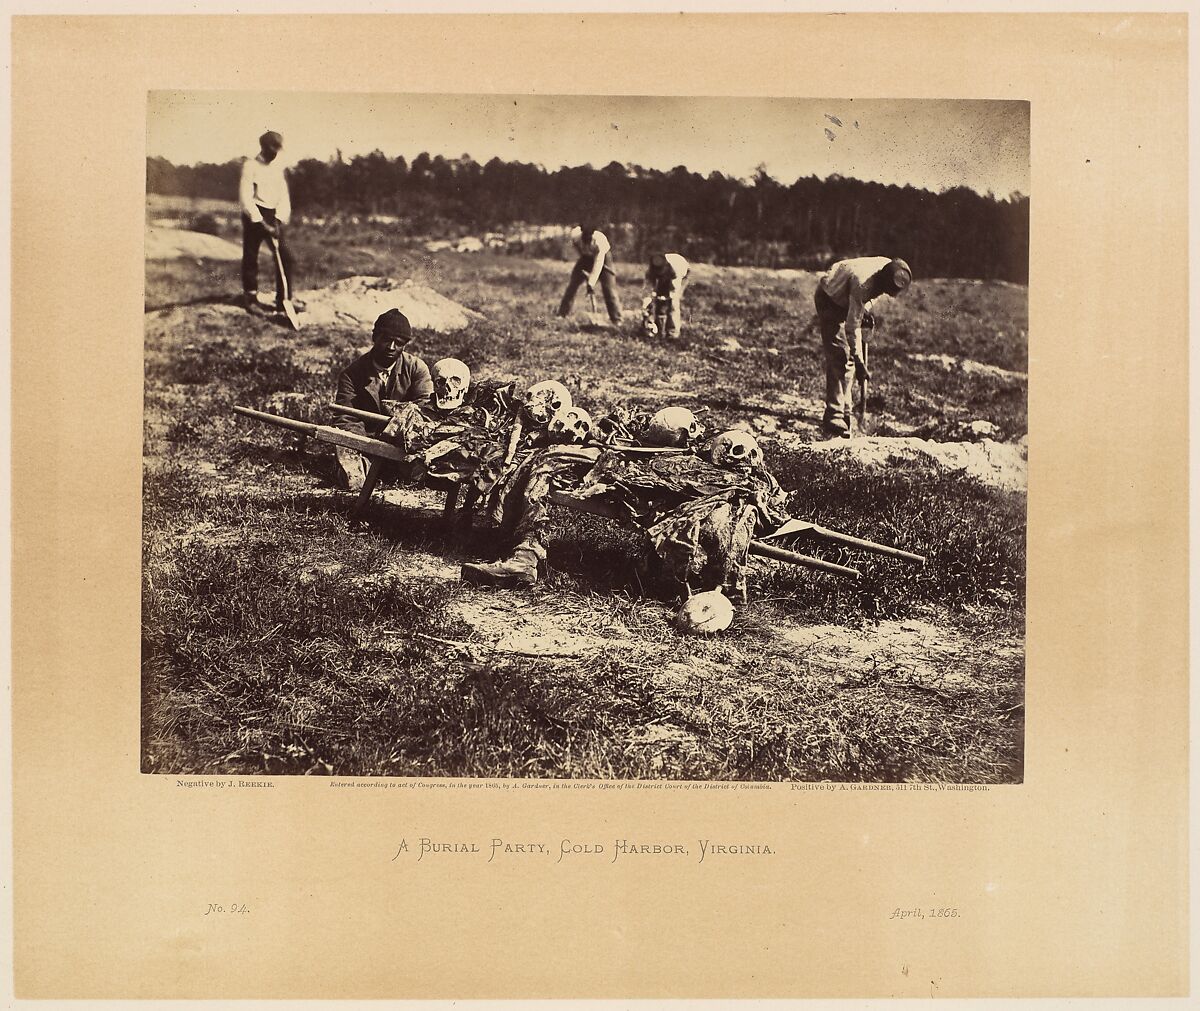 A Burial Party, Cold Harbor, Virginia., John Reekie (American, active 1860s), Albumen silver print from glass negative 